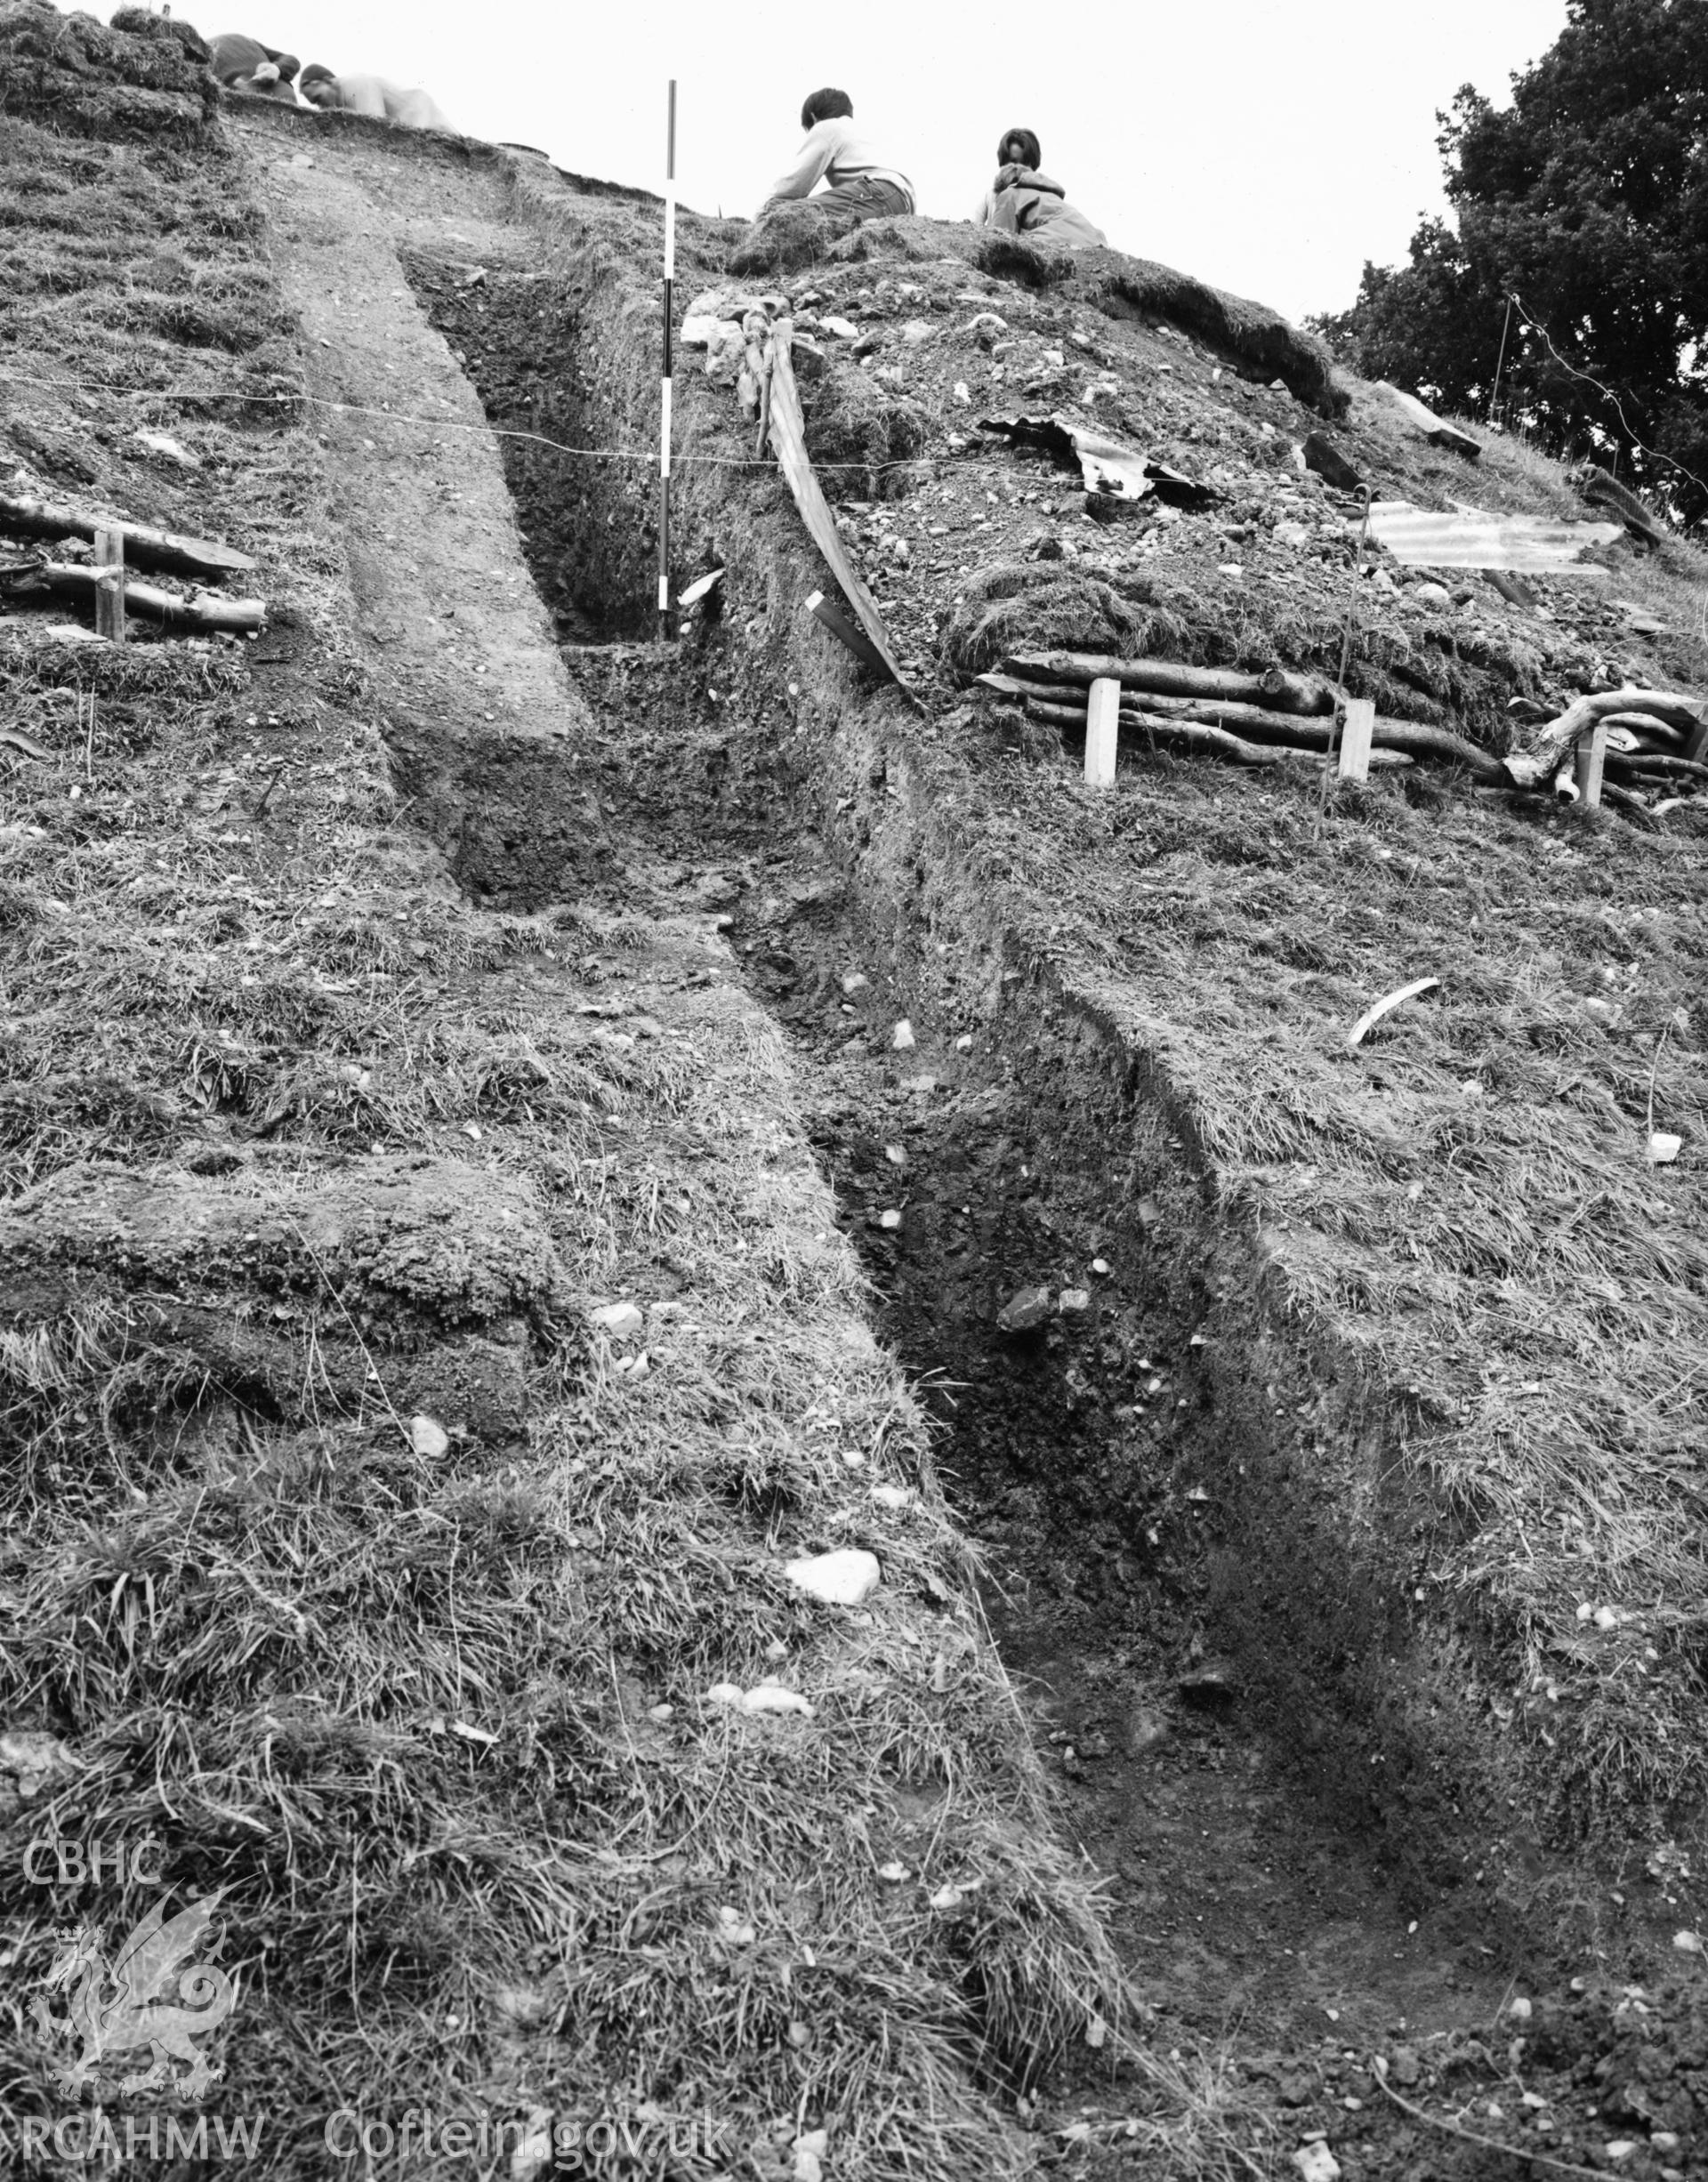 General view of excavations at Sycharth Castle from D.B.Hague Sycharth Collection.